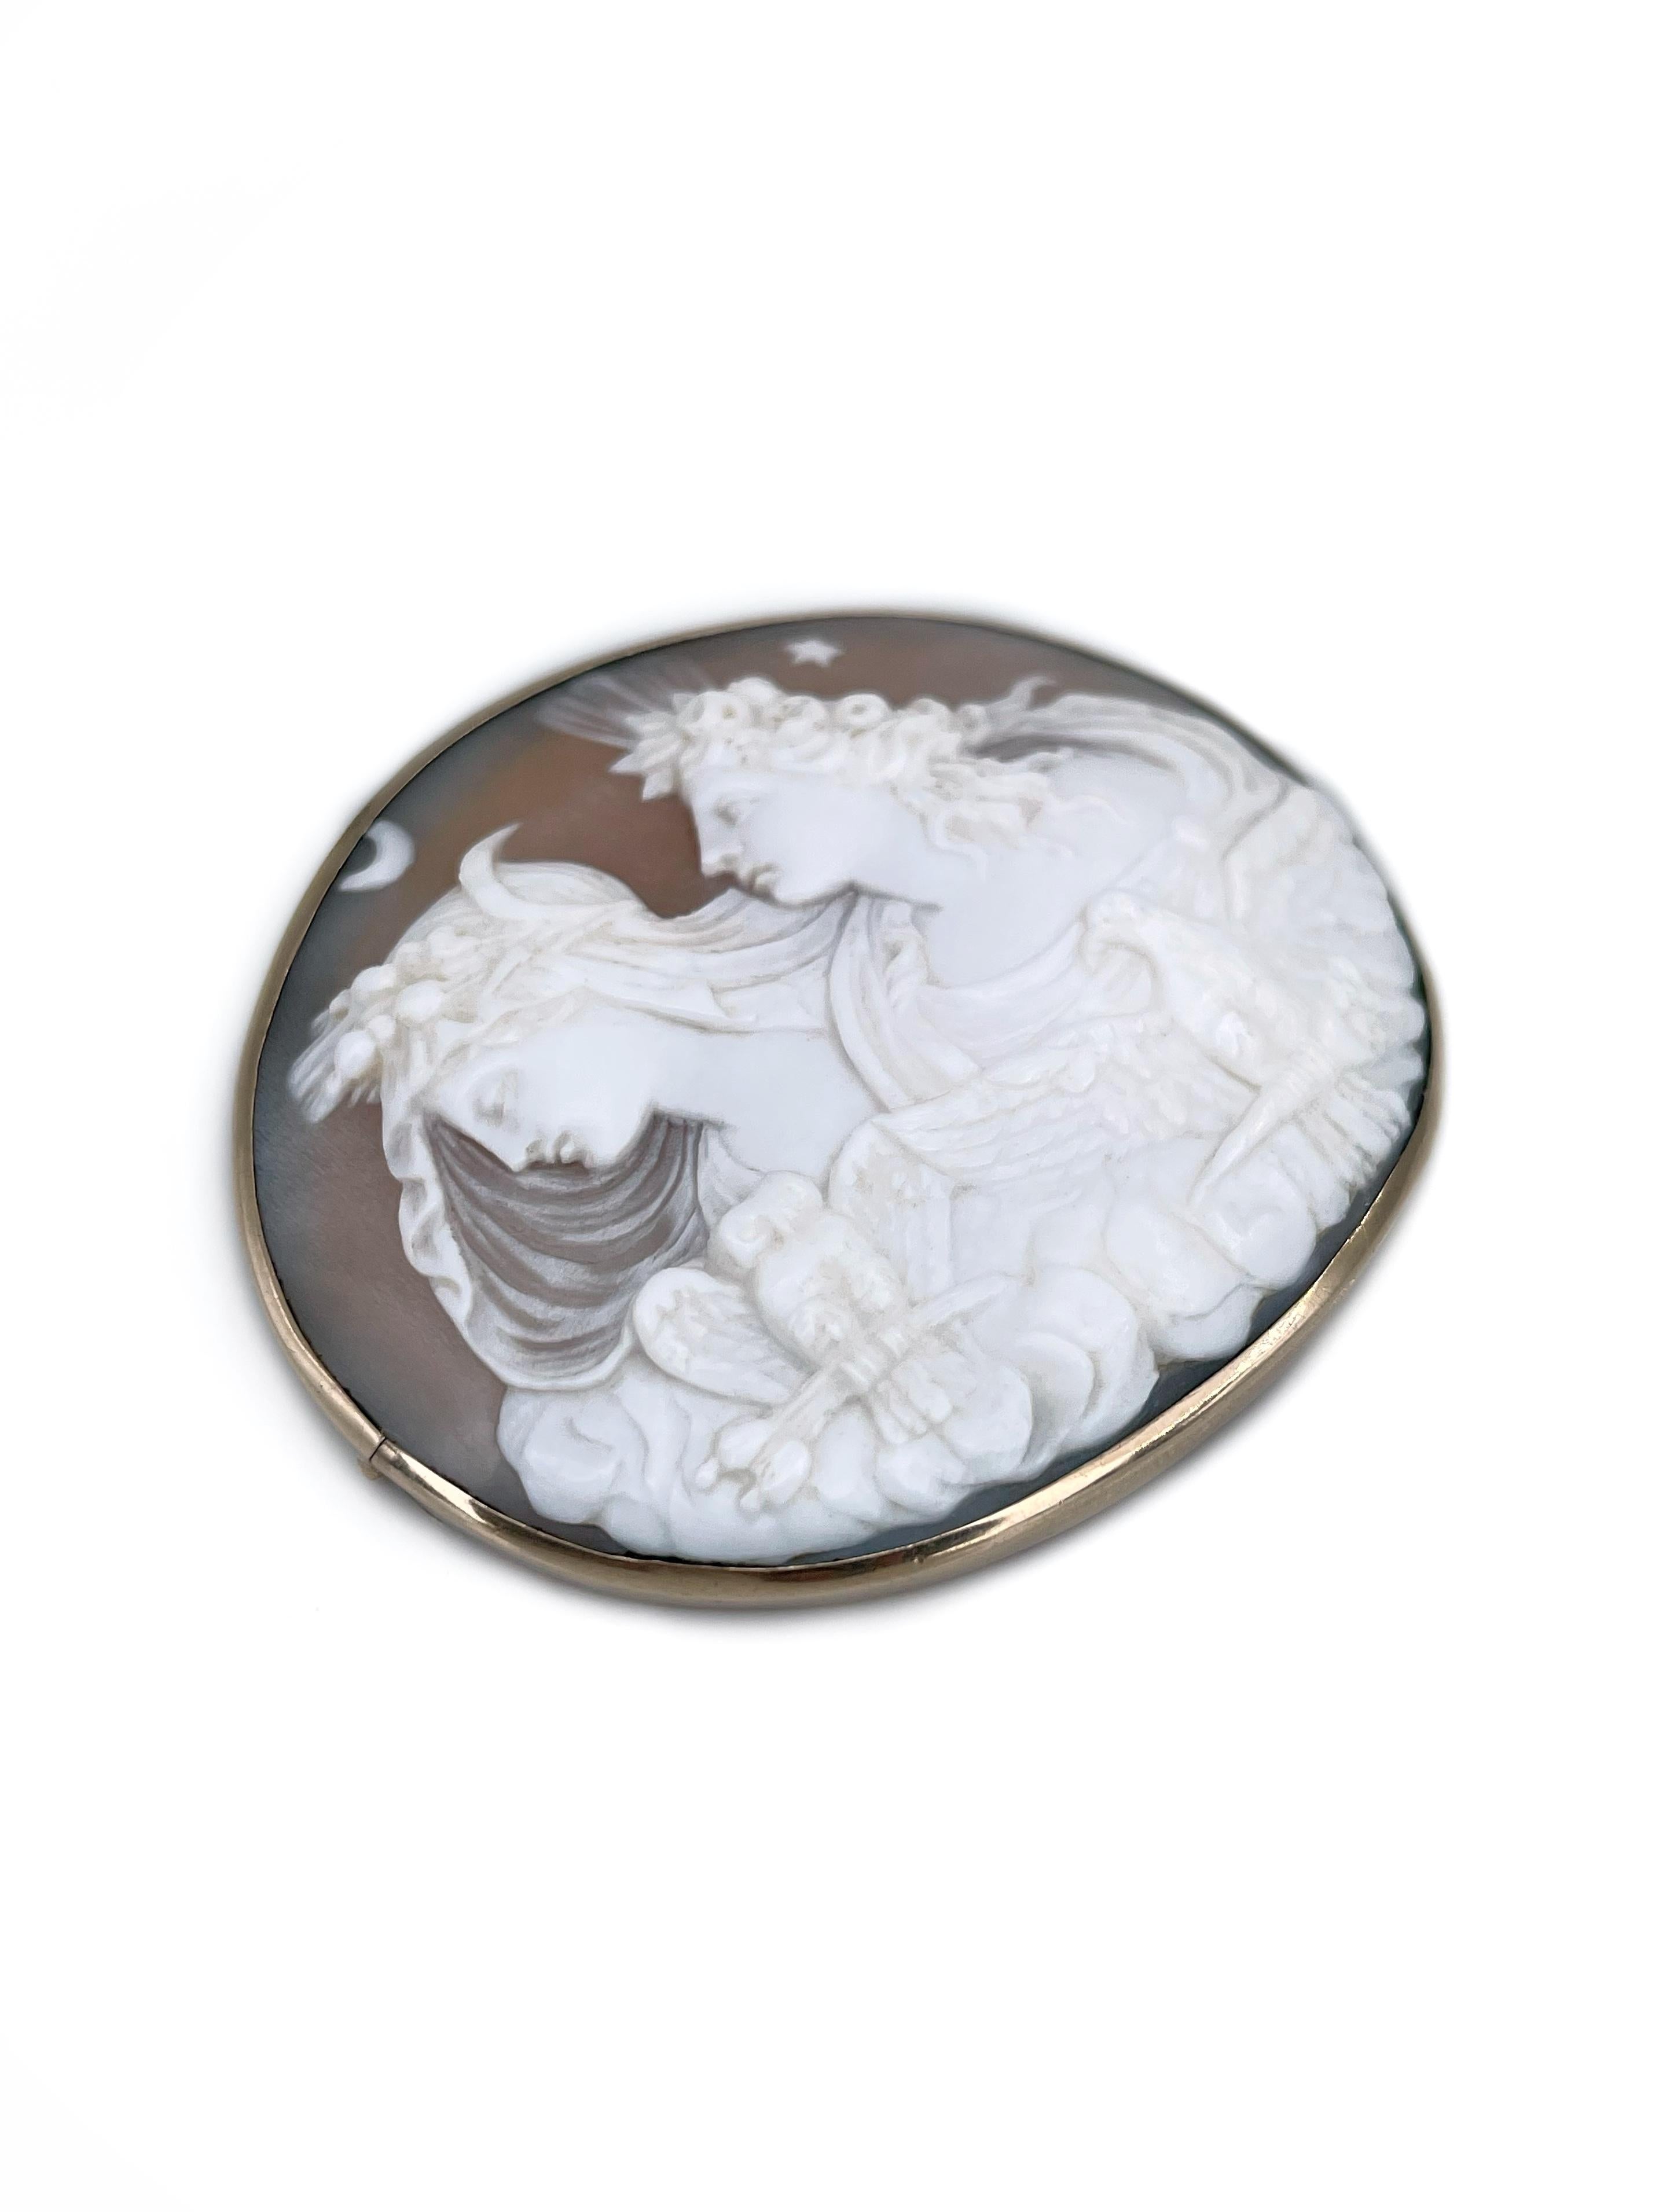 Victorian Left Facing Greek Goddesses Eos And Nyx Shell Cameo Pin Brooch In Good Condition For Sale In Vilnius, LT